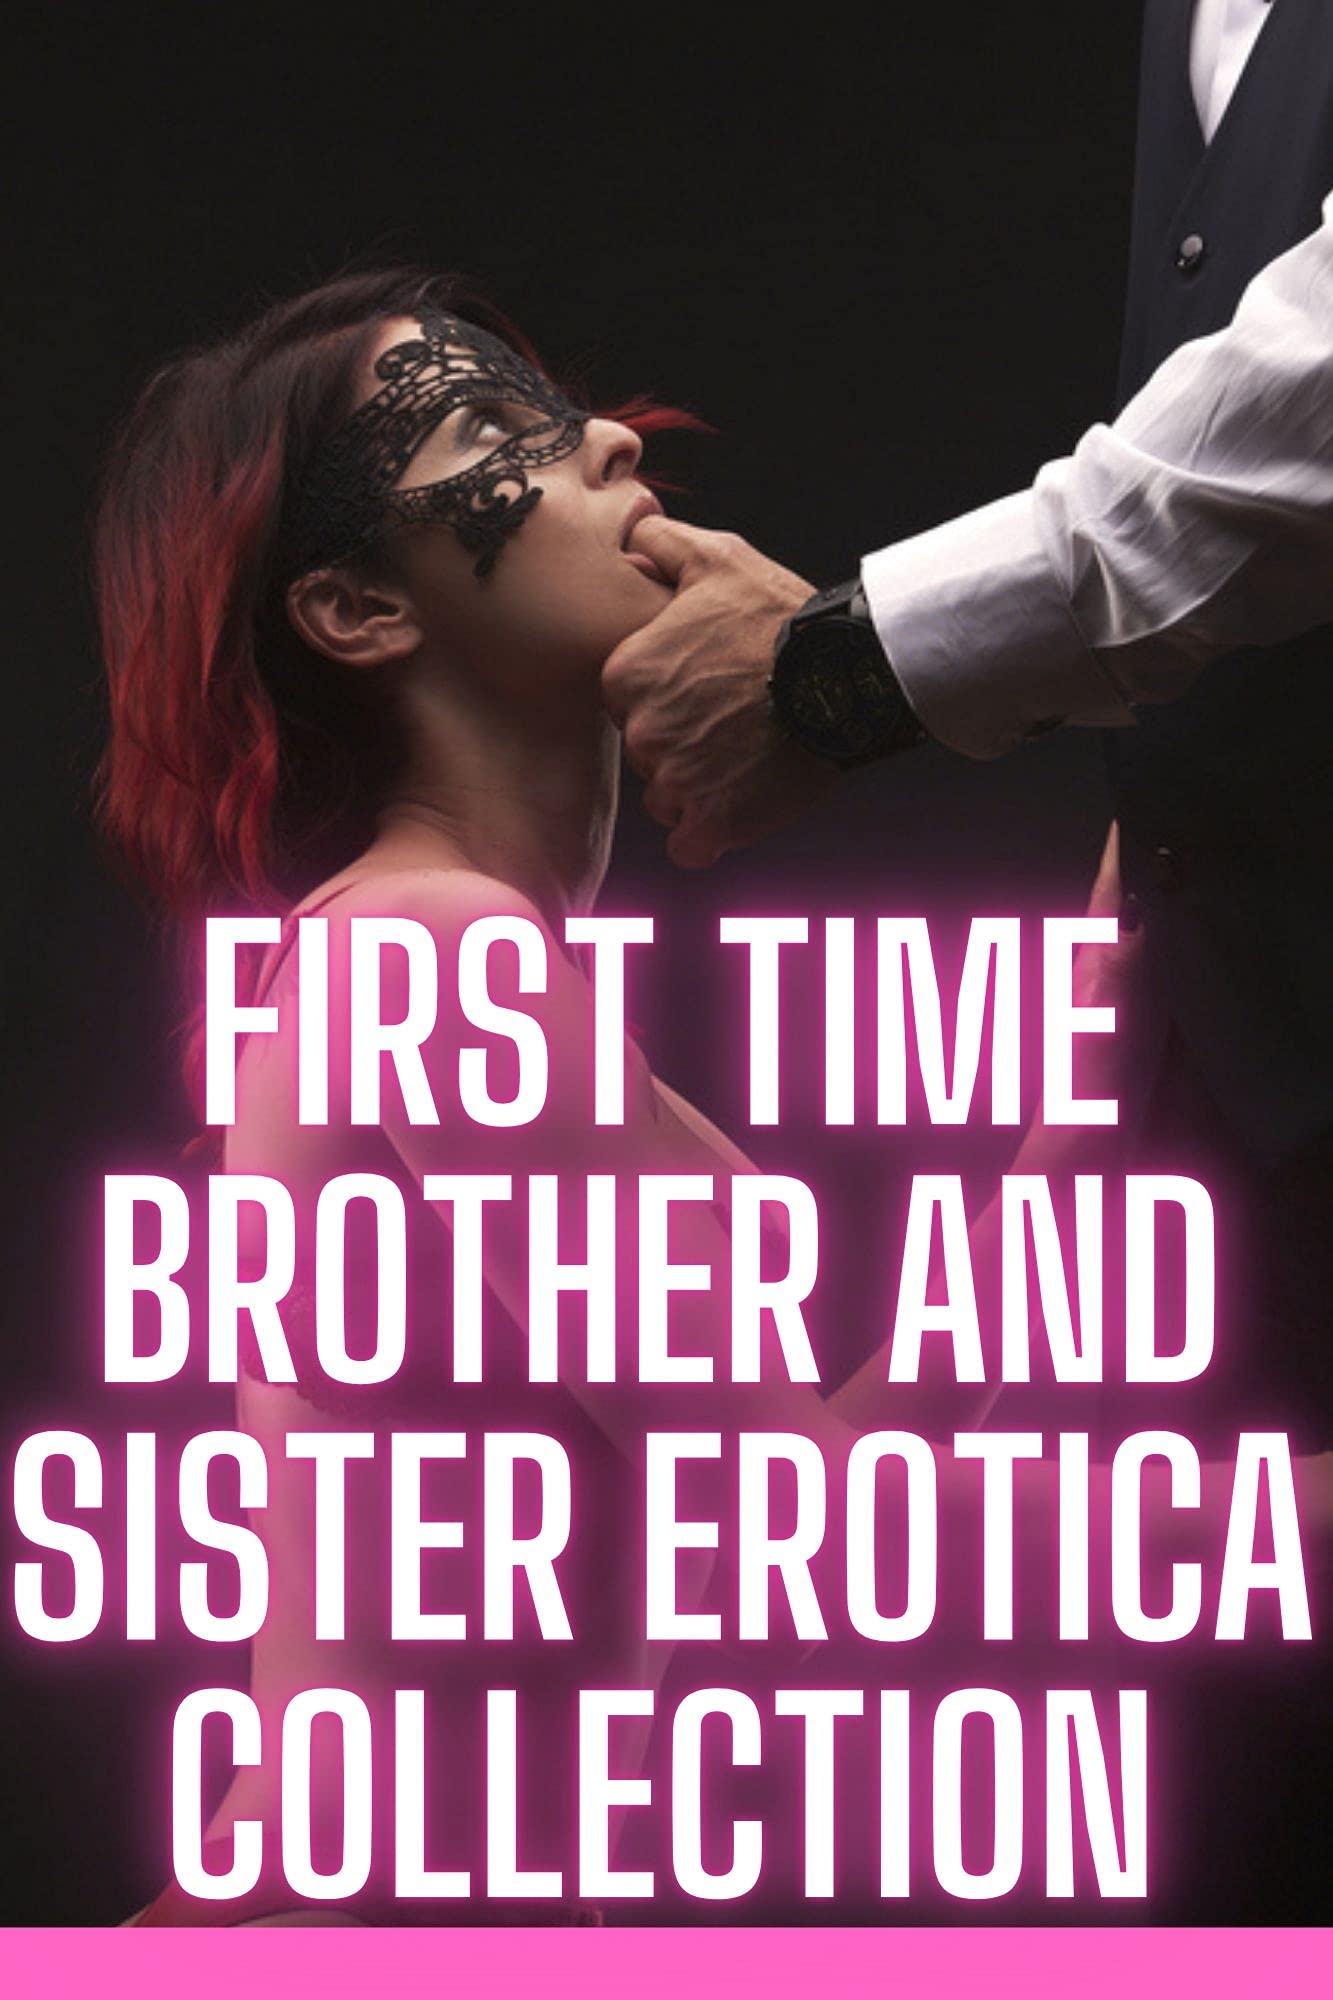 Best of Brother and sister stories